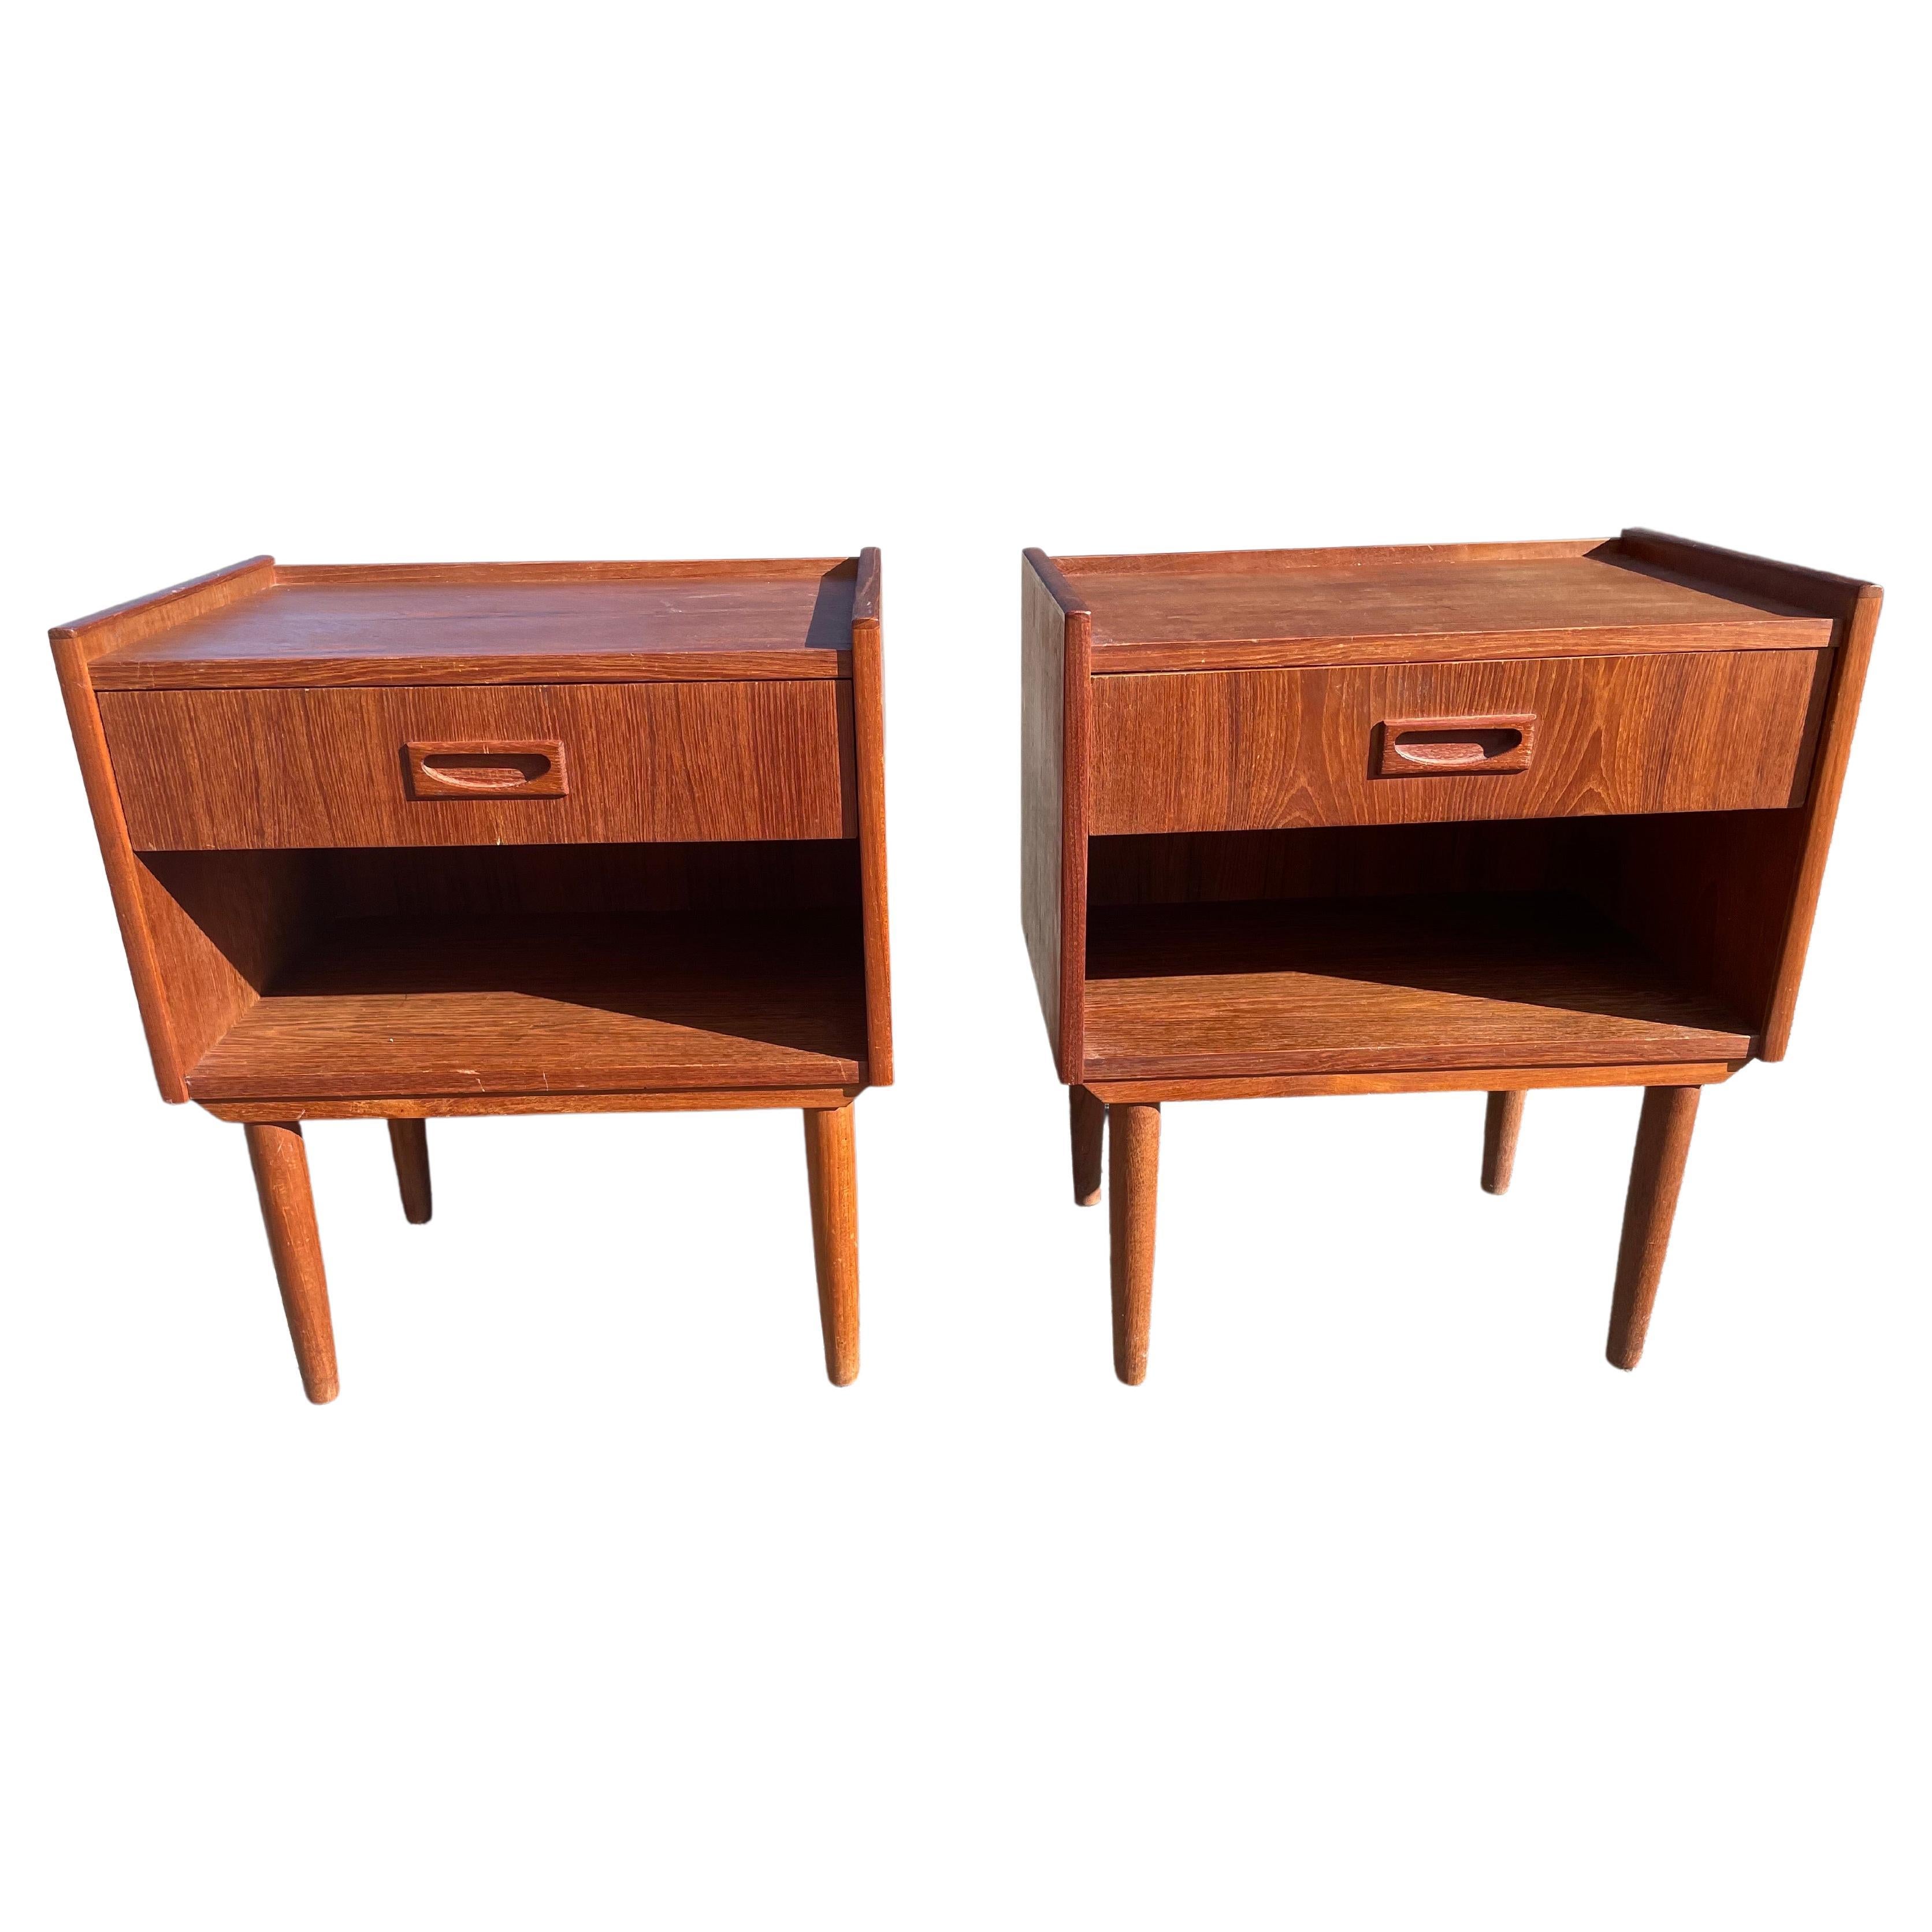 Set of Danish Mid-Century Modern Night Stands from the 1960s